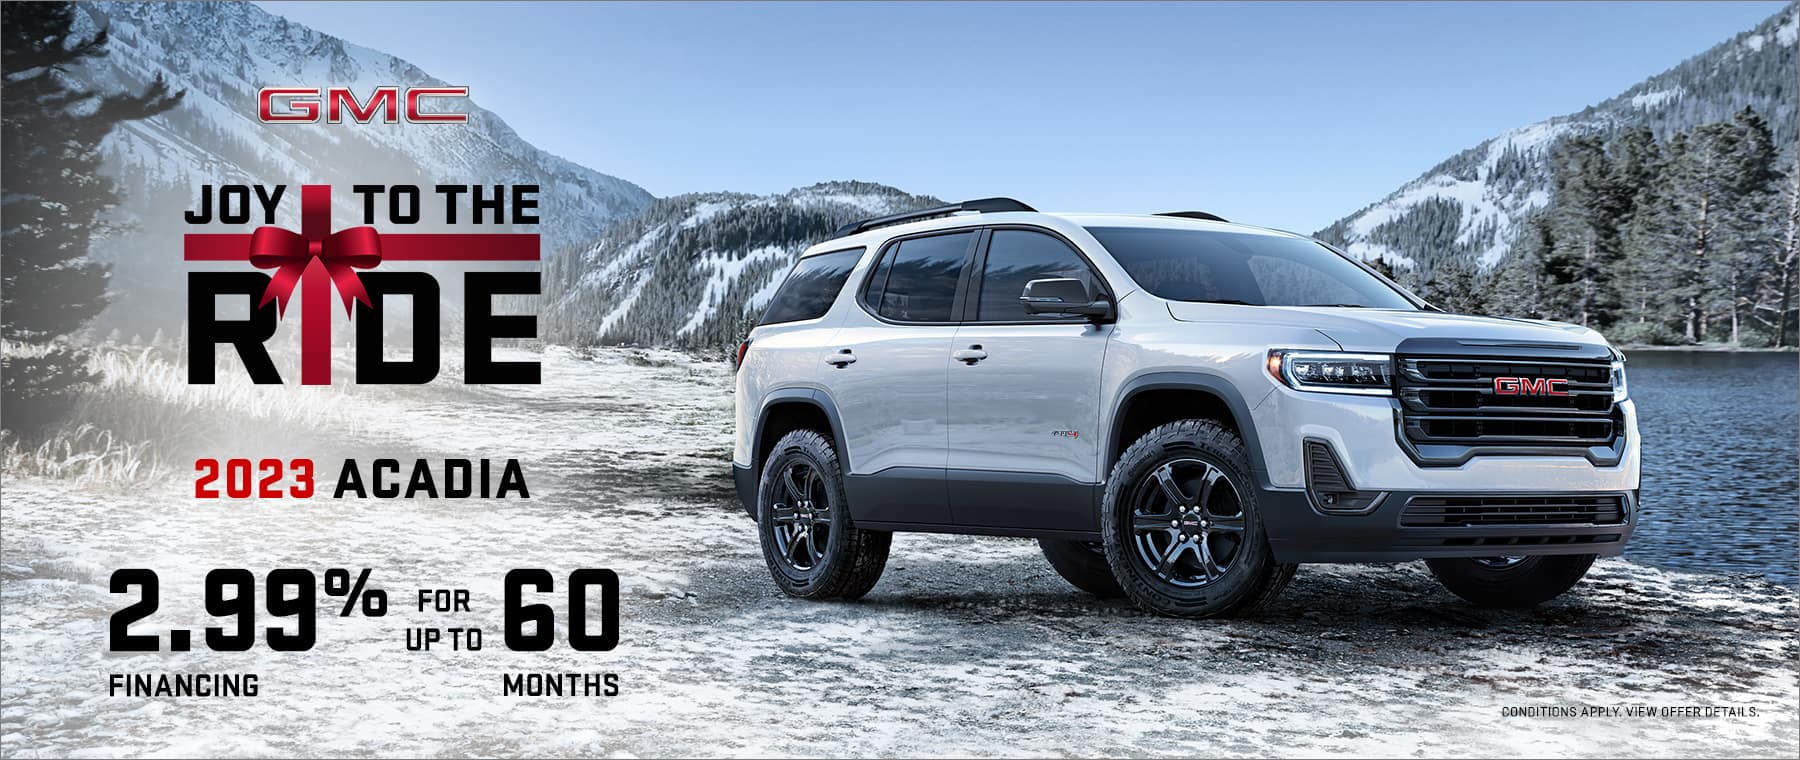 Get 2.99% financing for up to 60 months on a new 2023 GMC Acadia